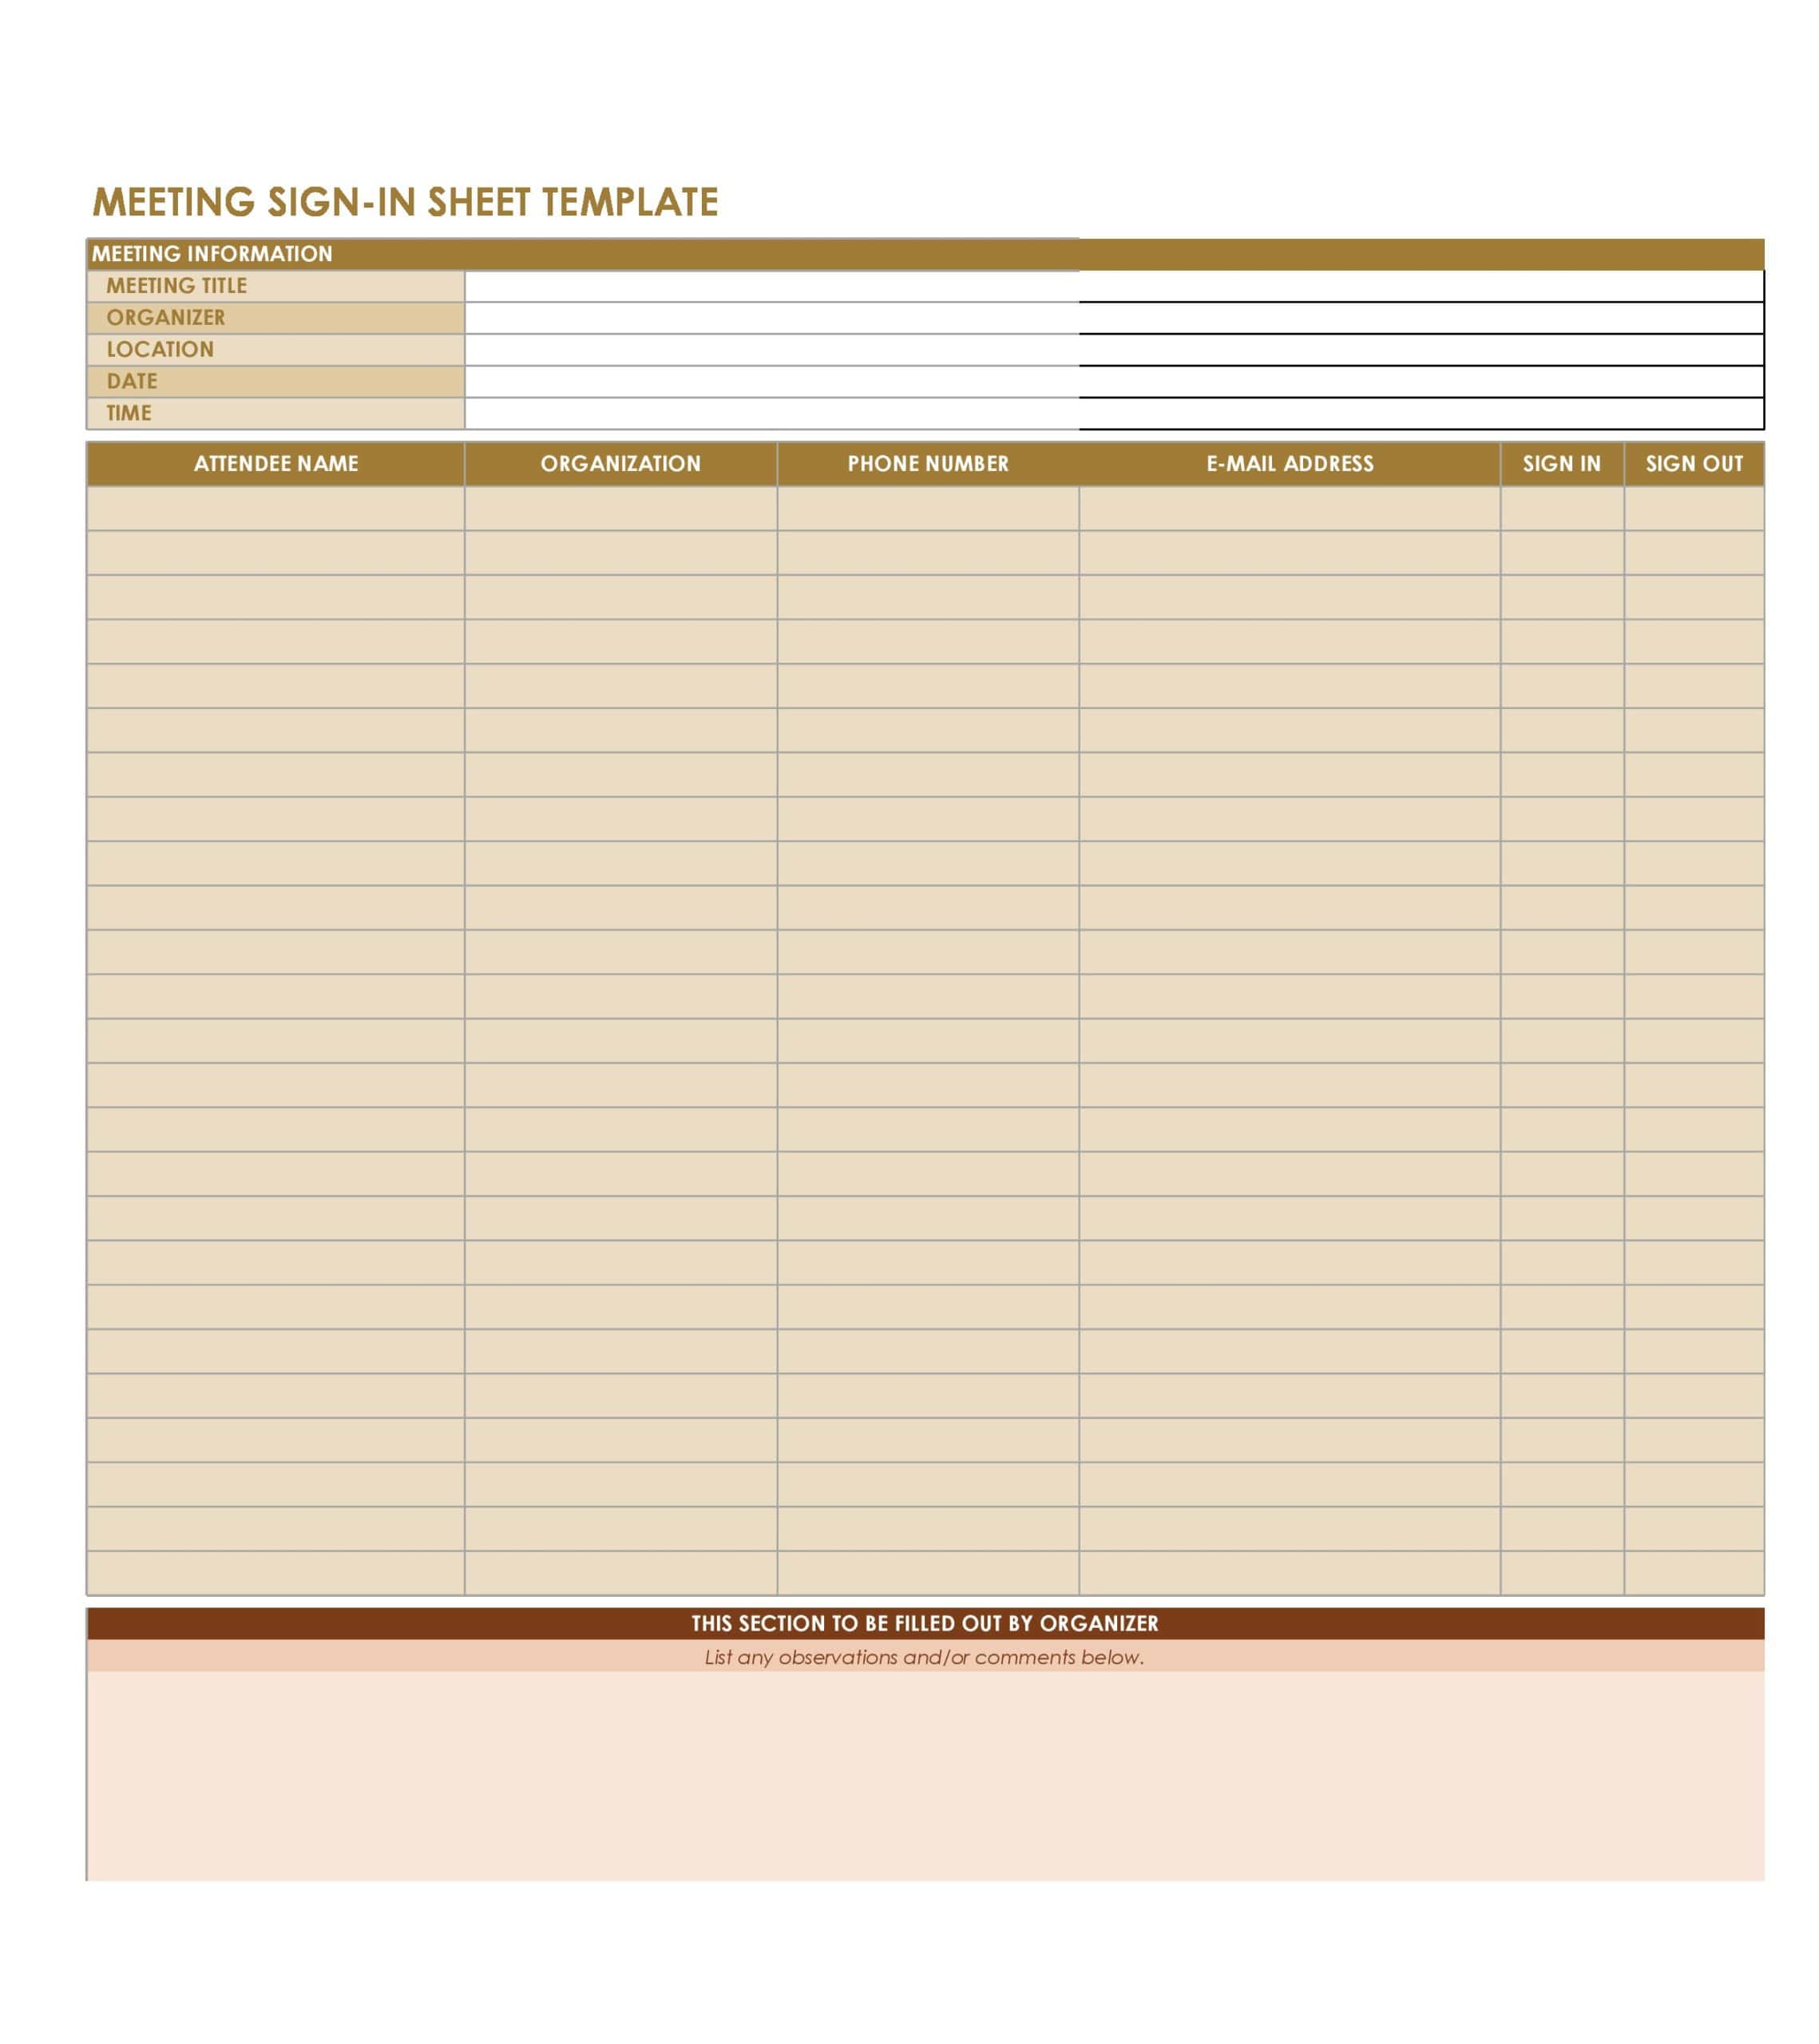 Sign Out Sheet Template Word from templatearchive.com